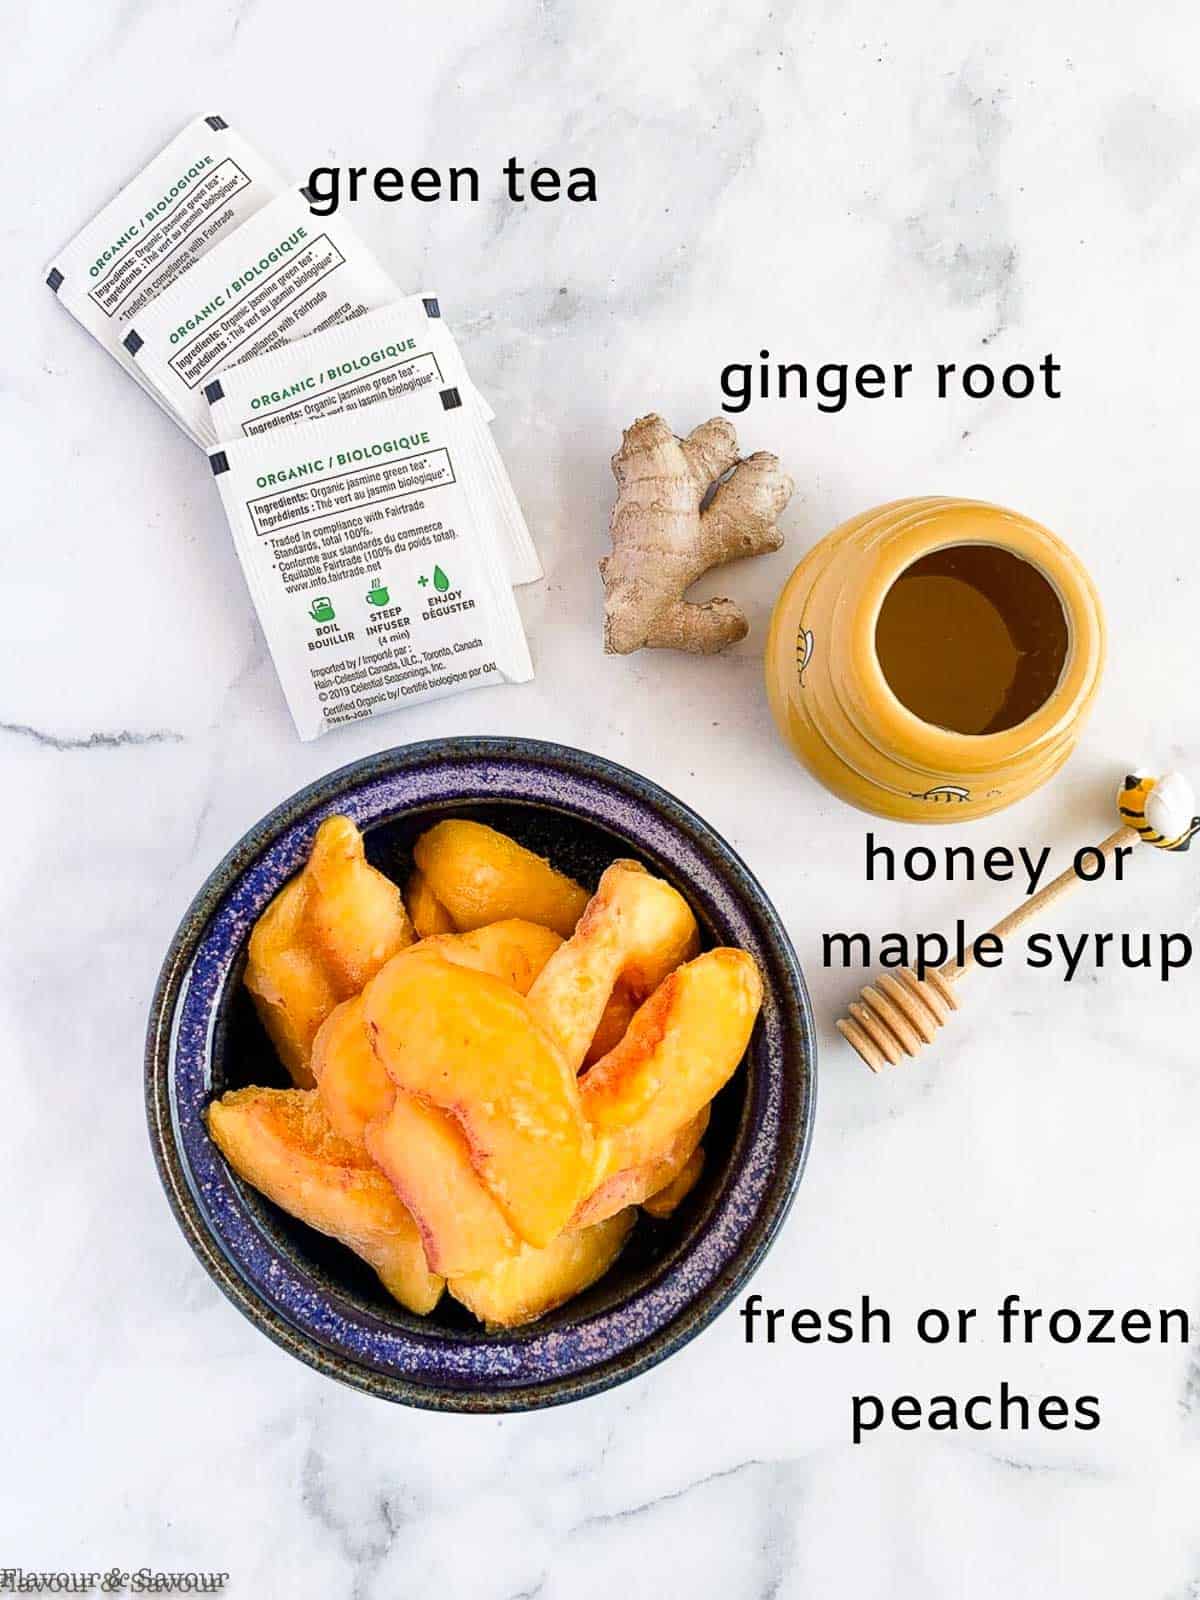 https://www.flavourandsavour.com/wp-content/uploads/2021/05/Labeled-ingredients-for-Peach-Iced-Green-Tea-2.jpg